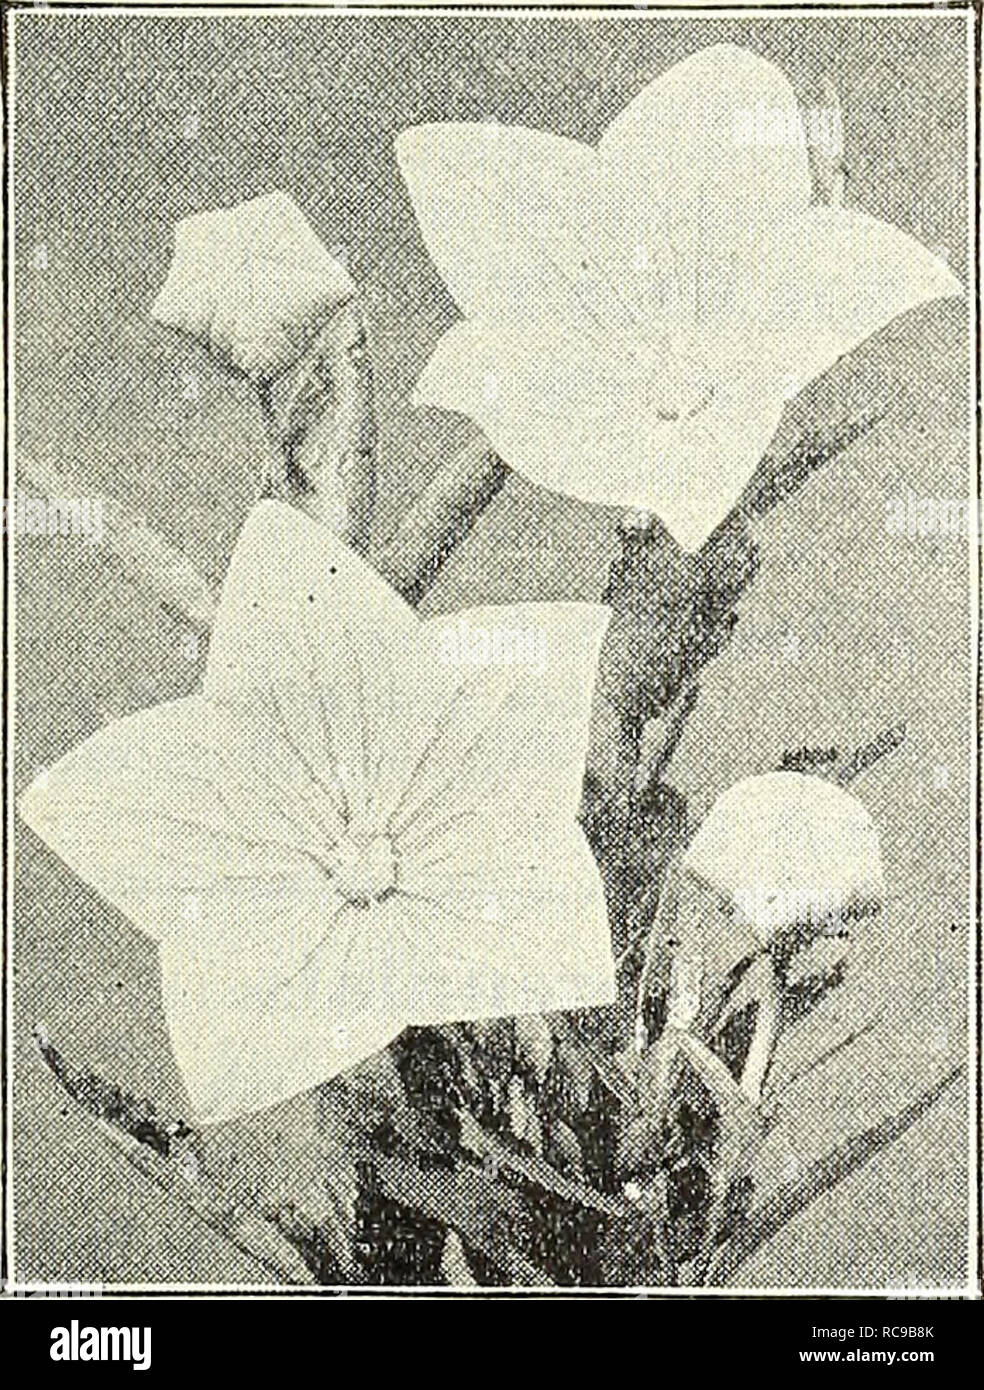 . Dreer's garden book : 1904. Seeds Catalogs; Nursery stock Catalogs; Gardening Equipment and supplies Catalogs; Flowers Seeds Catalogs; Vegetables Seeds Catalogs; Fruit Seeds Catalogs. PHYSOSTEGIA. (False Dragon Head.) One of the most beautiful of our mid- summer-flowering perennials, forming dense bushes 3 to 4 feet high, bearing spikes of delicate tubular flowers not un- like a gigantic heather. (See cut.) Virginica, Bright but soft pink. â Alba. Pure white; very fine. â â Denticulata. Very delicate pink. 15 cts. each; $1.50 per doz.. Please note that these images are extracted from scanned Stock Photo